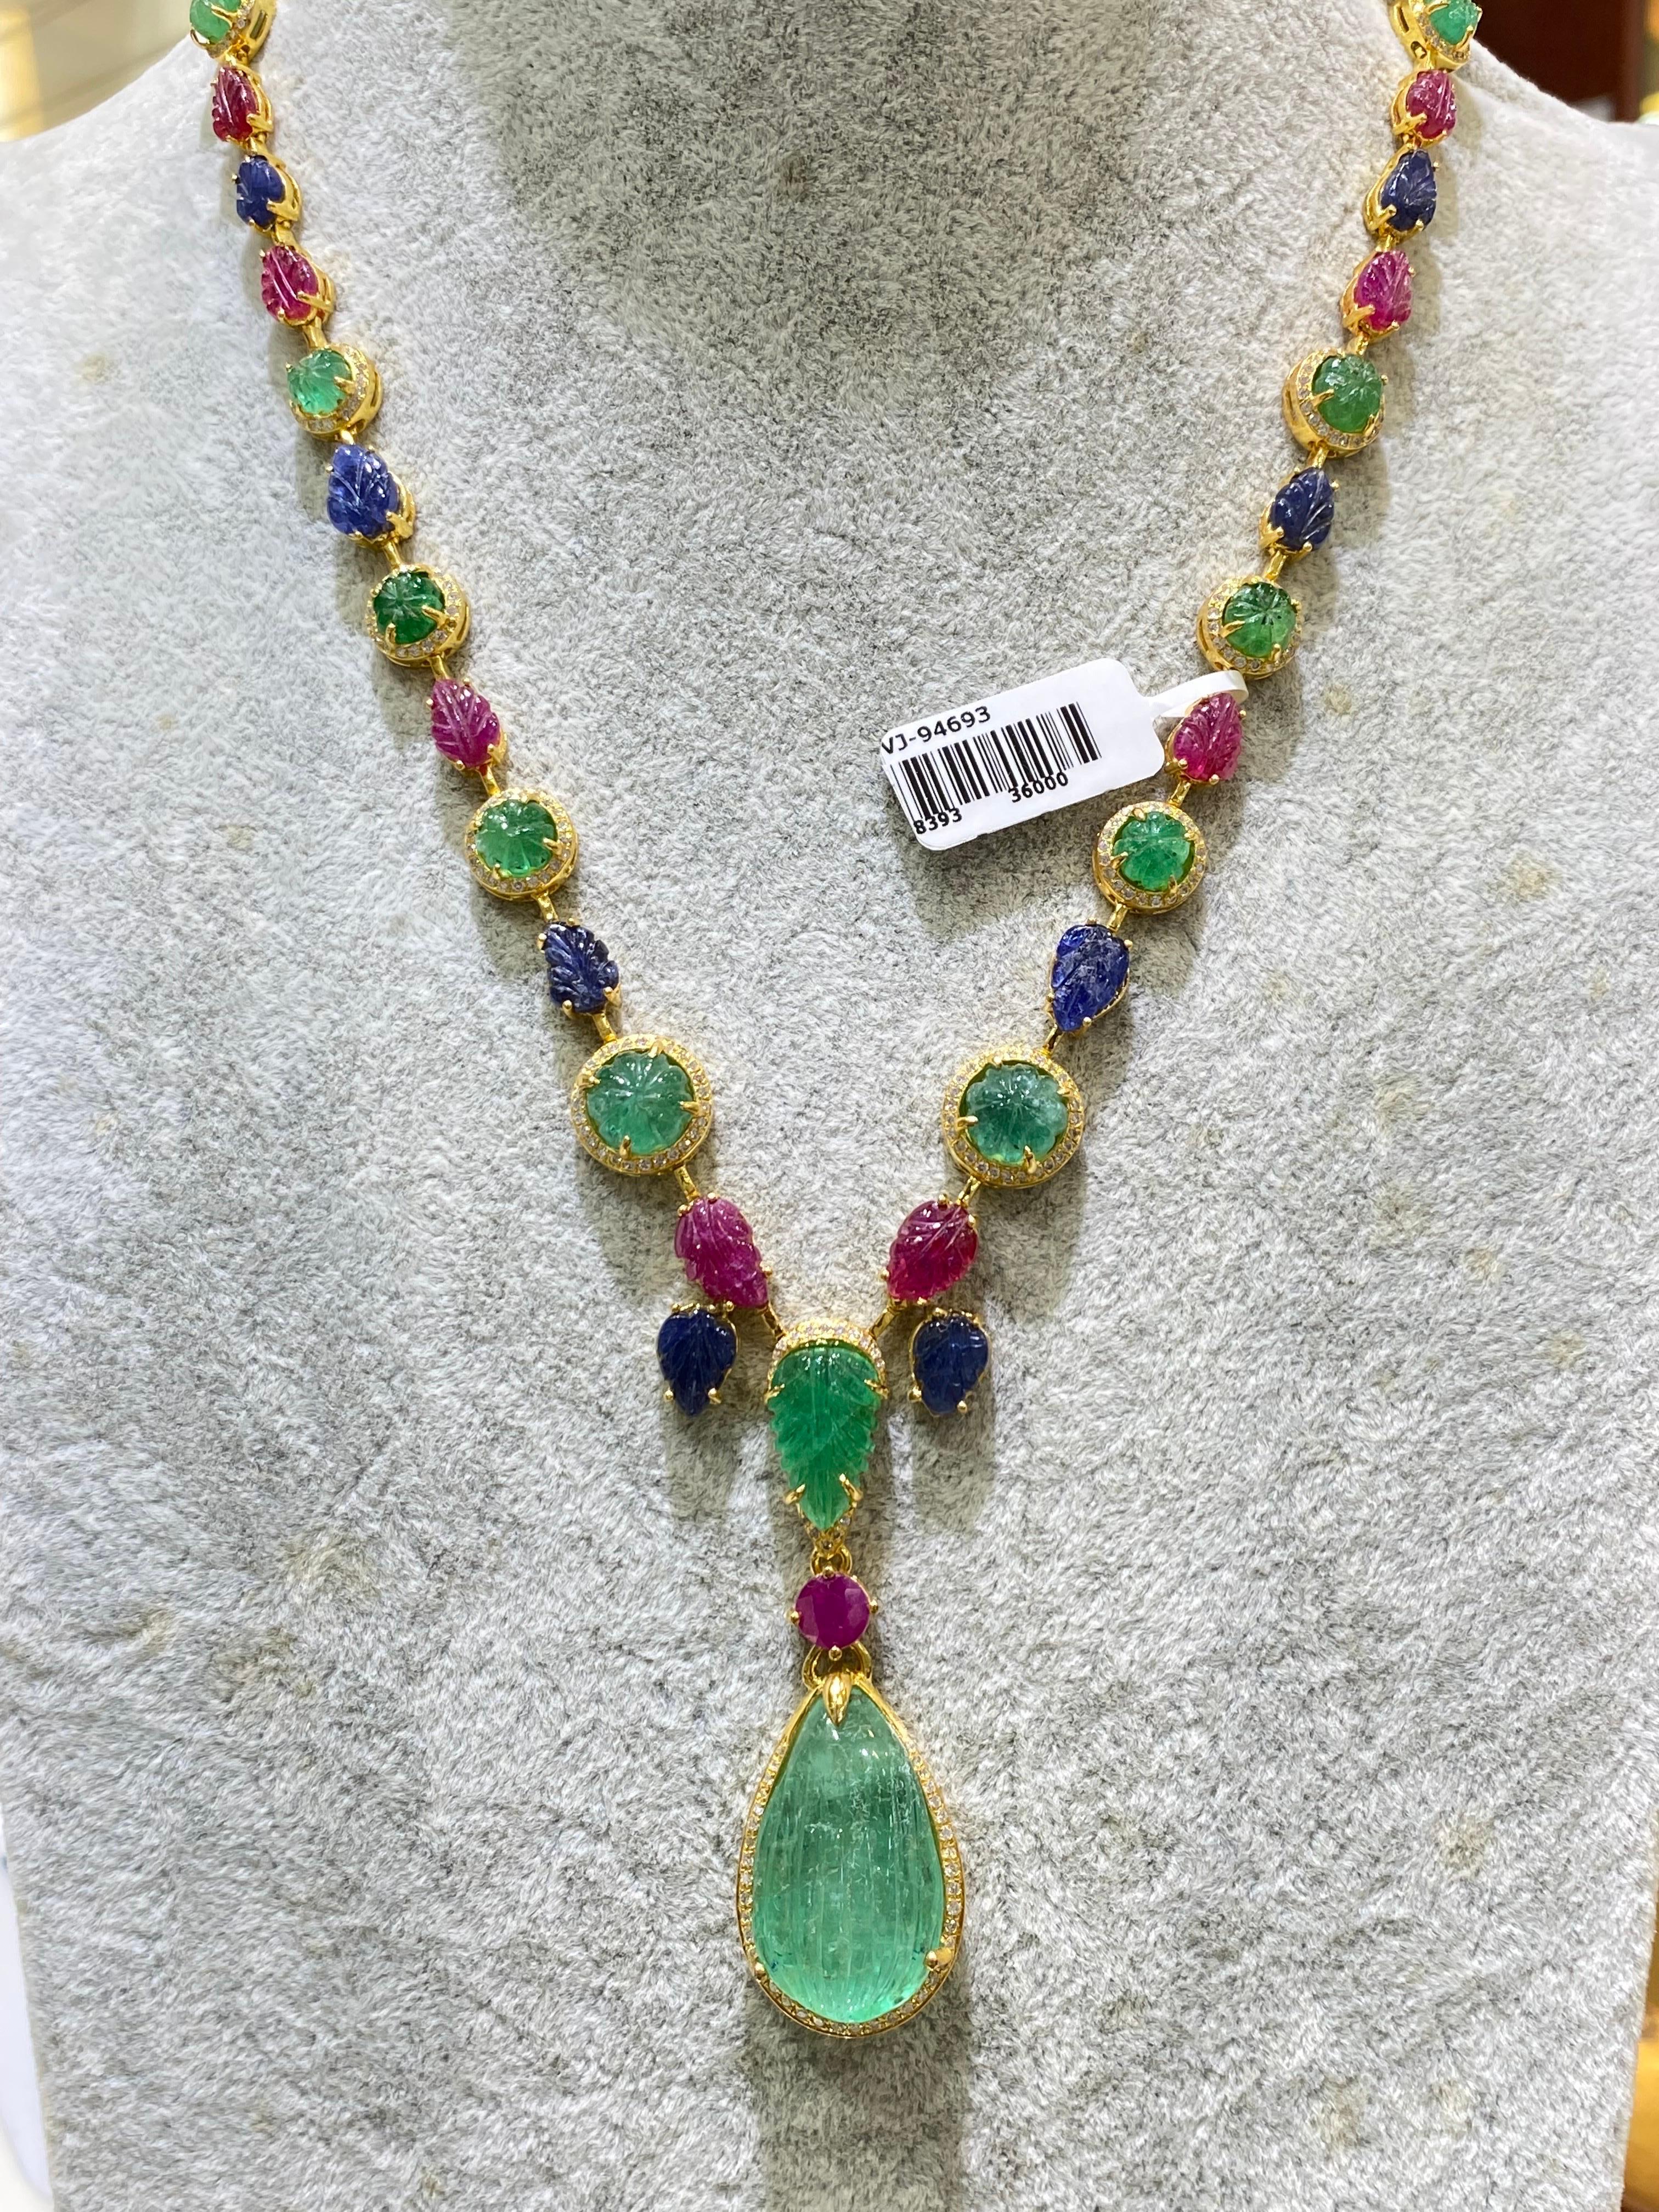 A beautiful tutti-frutti art-deco necklace with vibrant colored natural gemstones, 56.3 carats Colombian Emerald, 24.84 carat Ruby, 15.64 carat Sapphire and 1.65 carat Diamonds - all set in solid 18K Yellow Gold. The necklace is around 20 inches